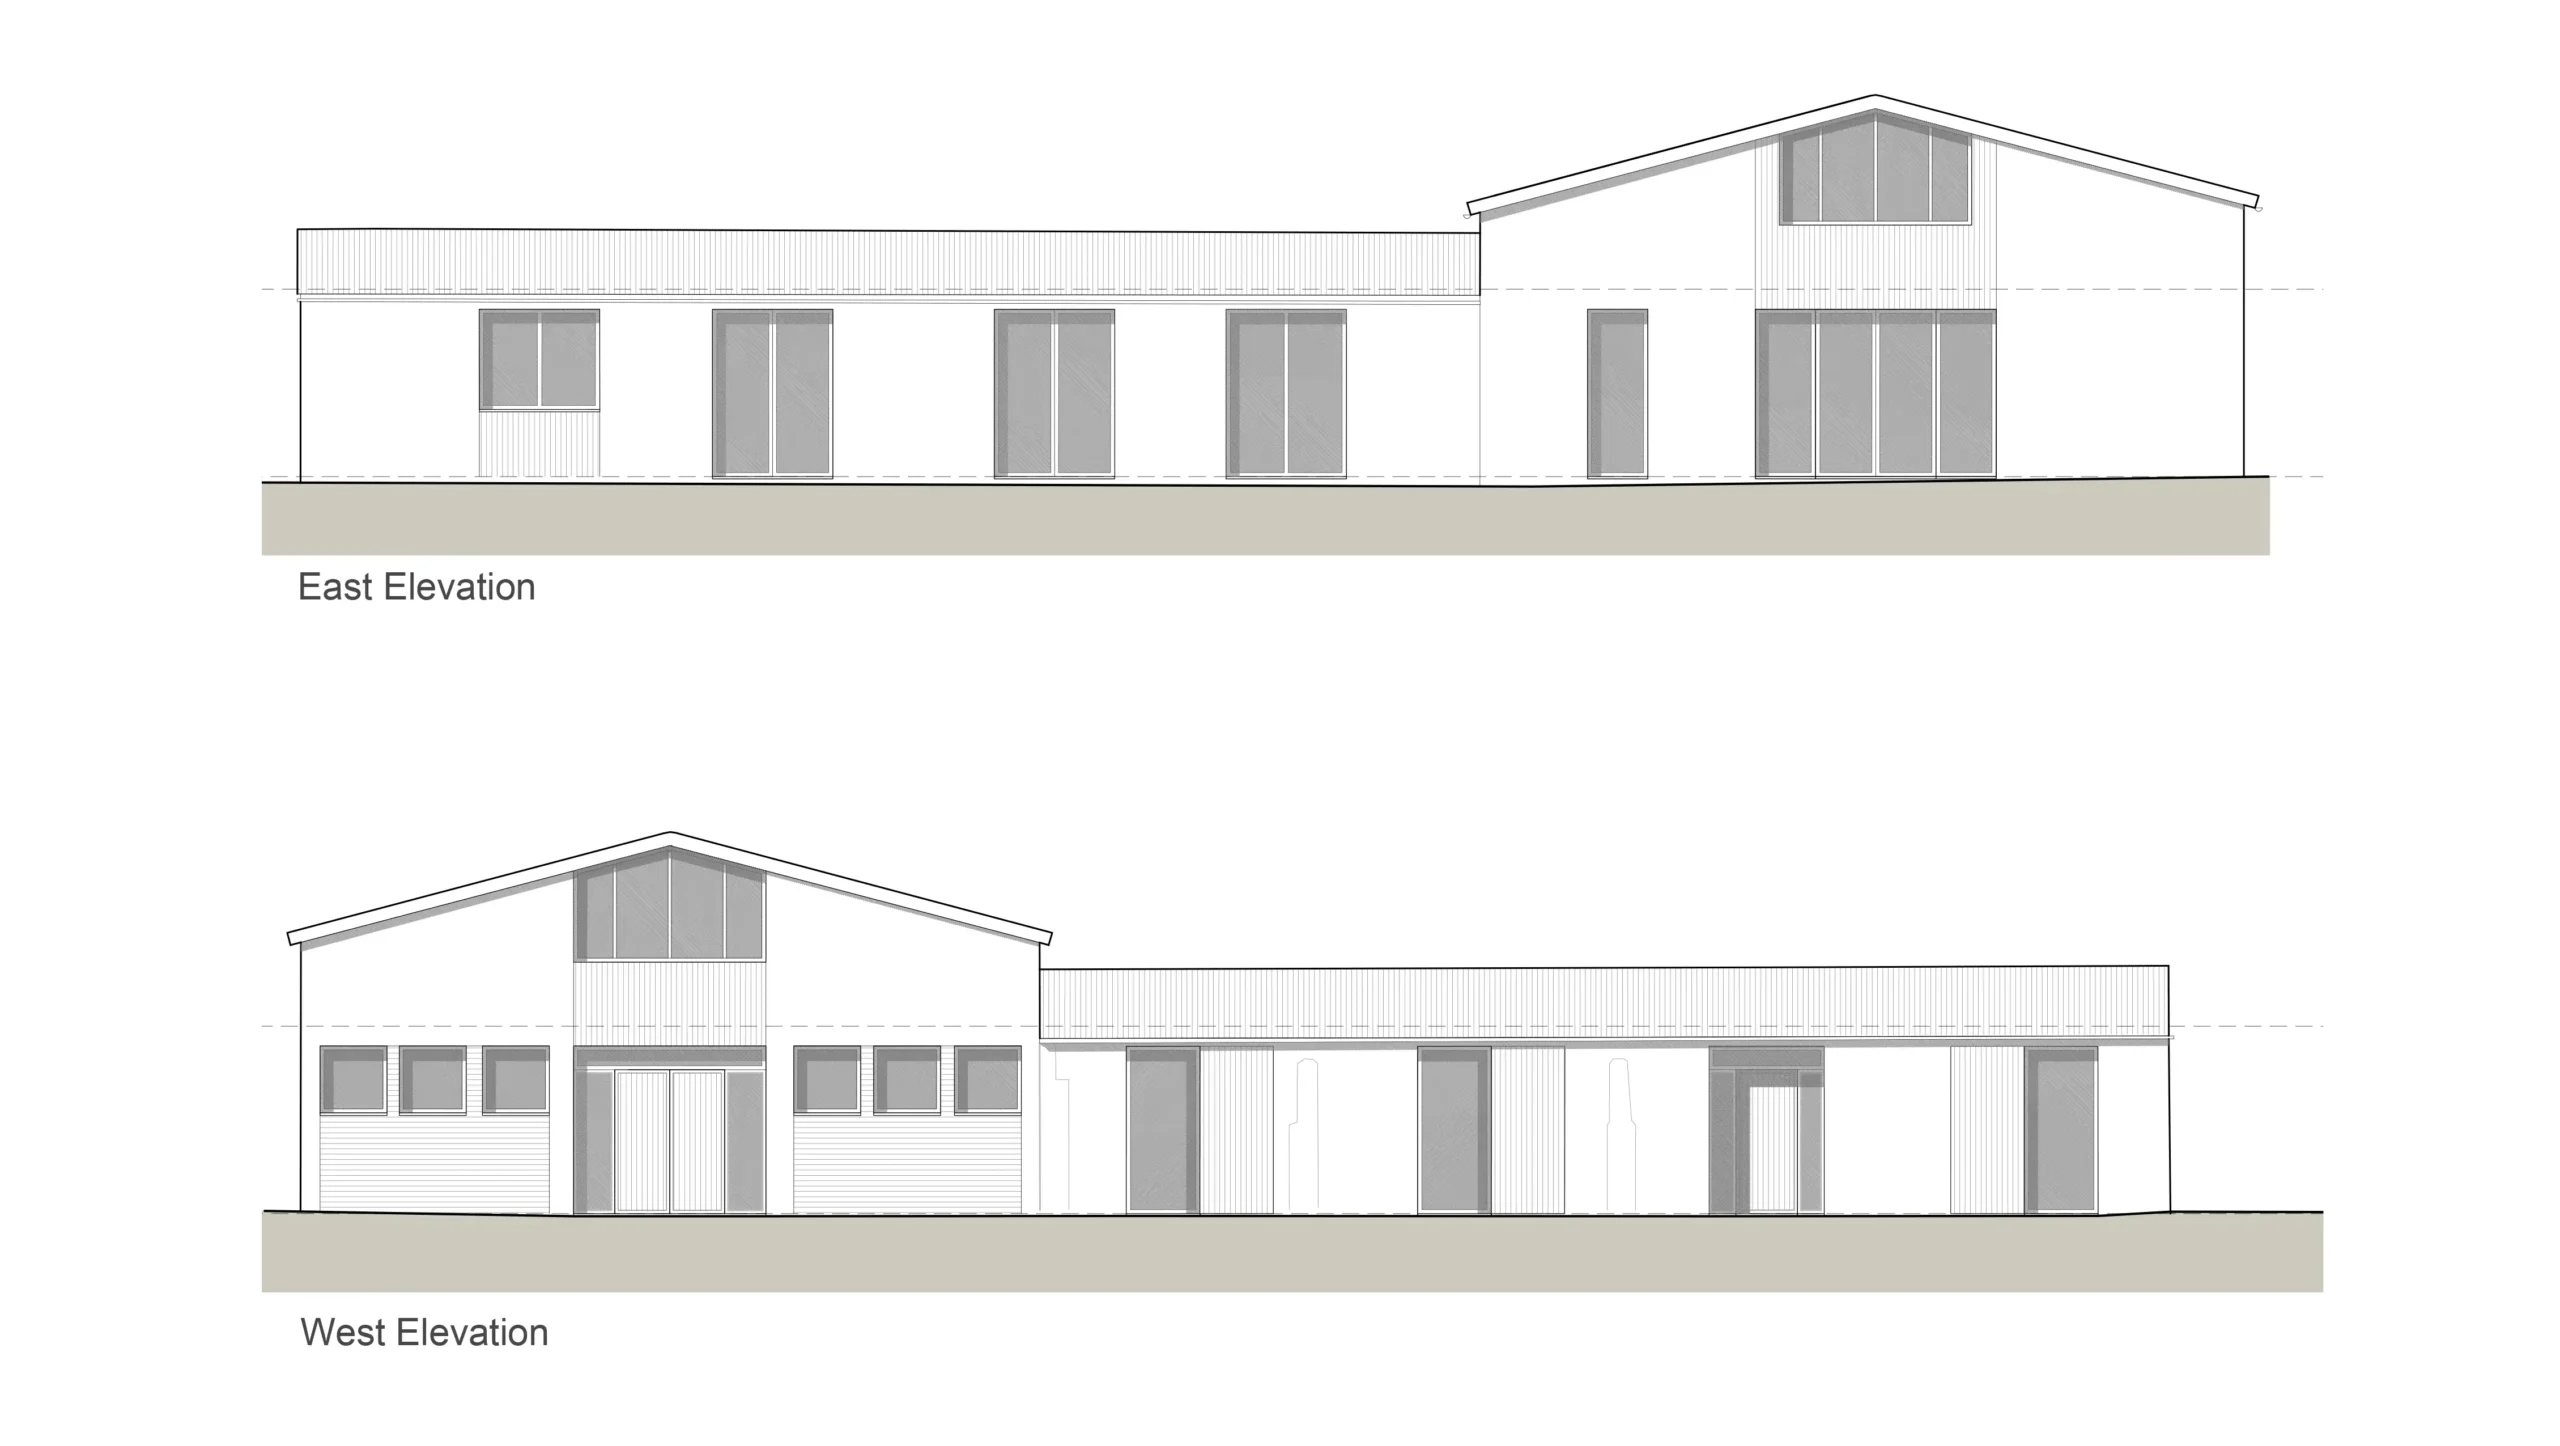 Proposed elevations of plots 1 and 2 on the site at Wellhayes Farm, Pilton. Picture: Orme/Somerset Council